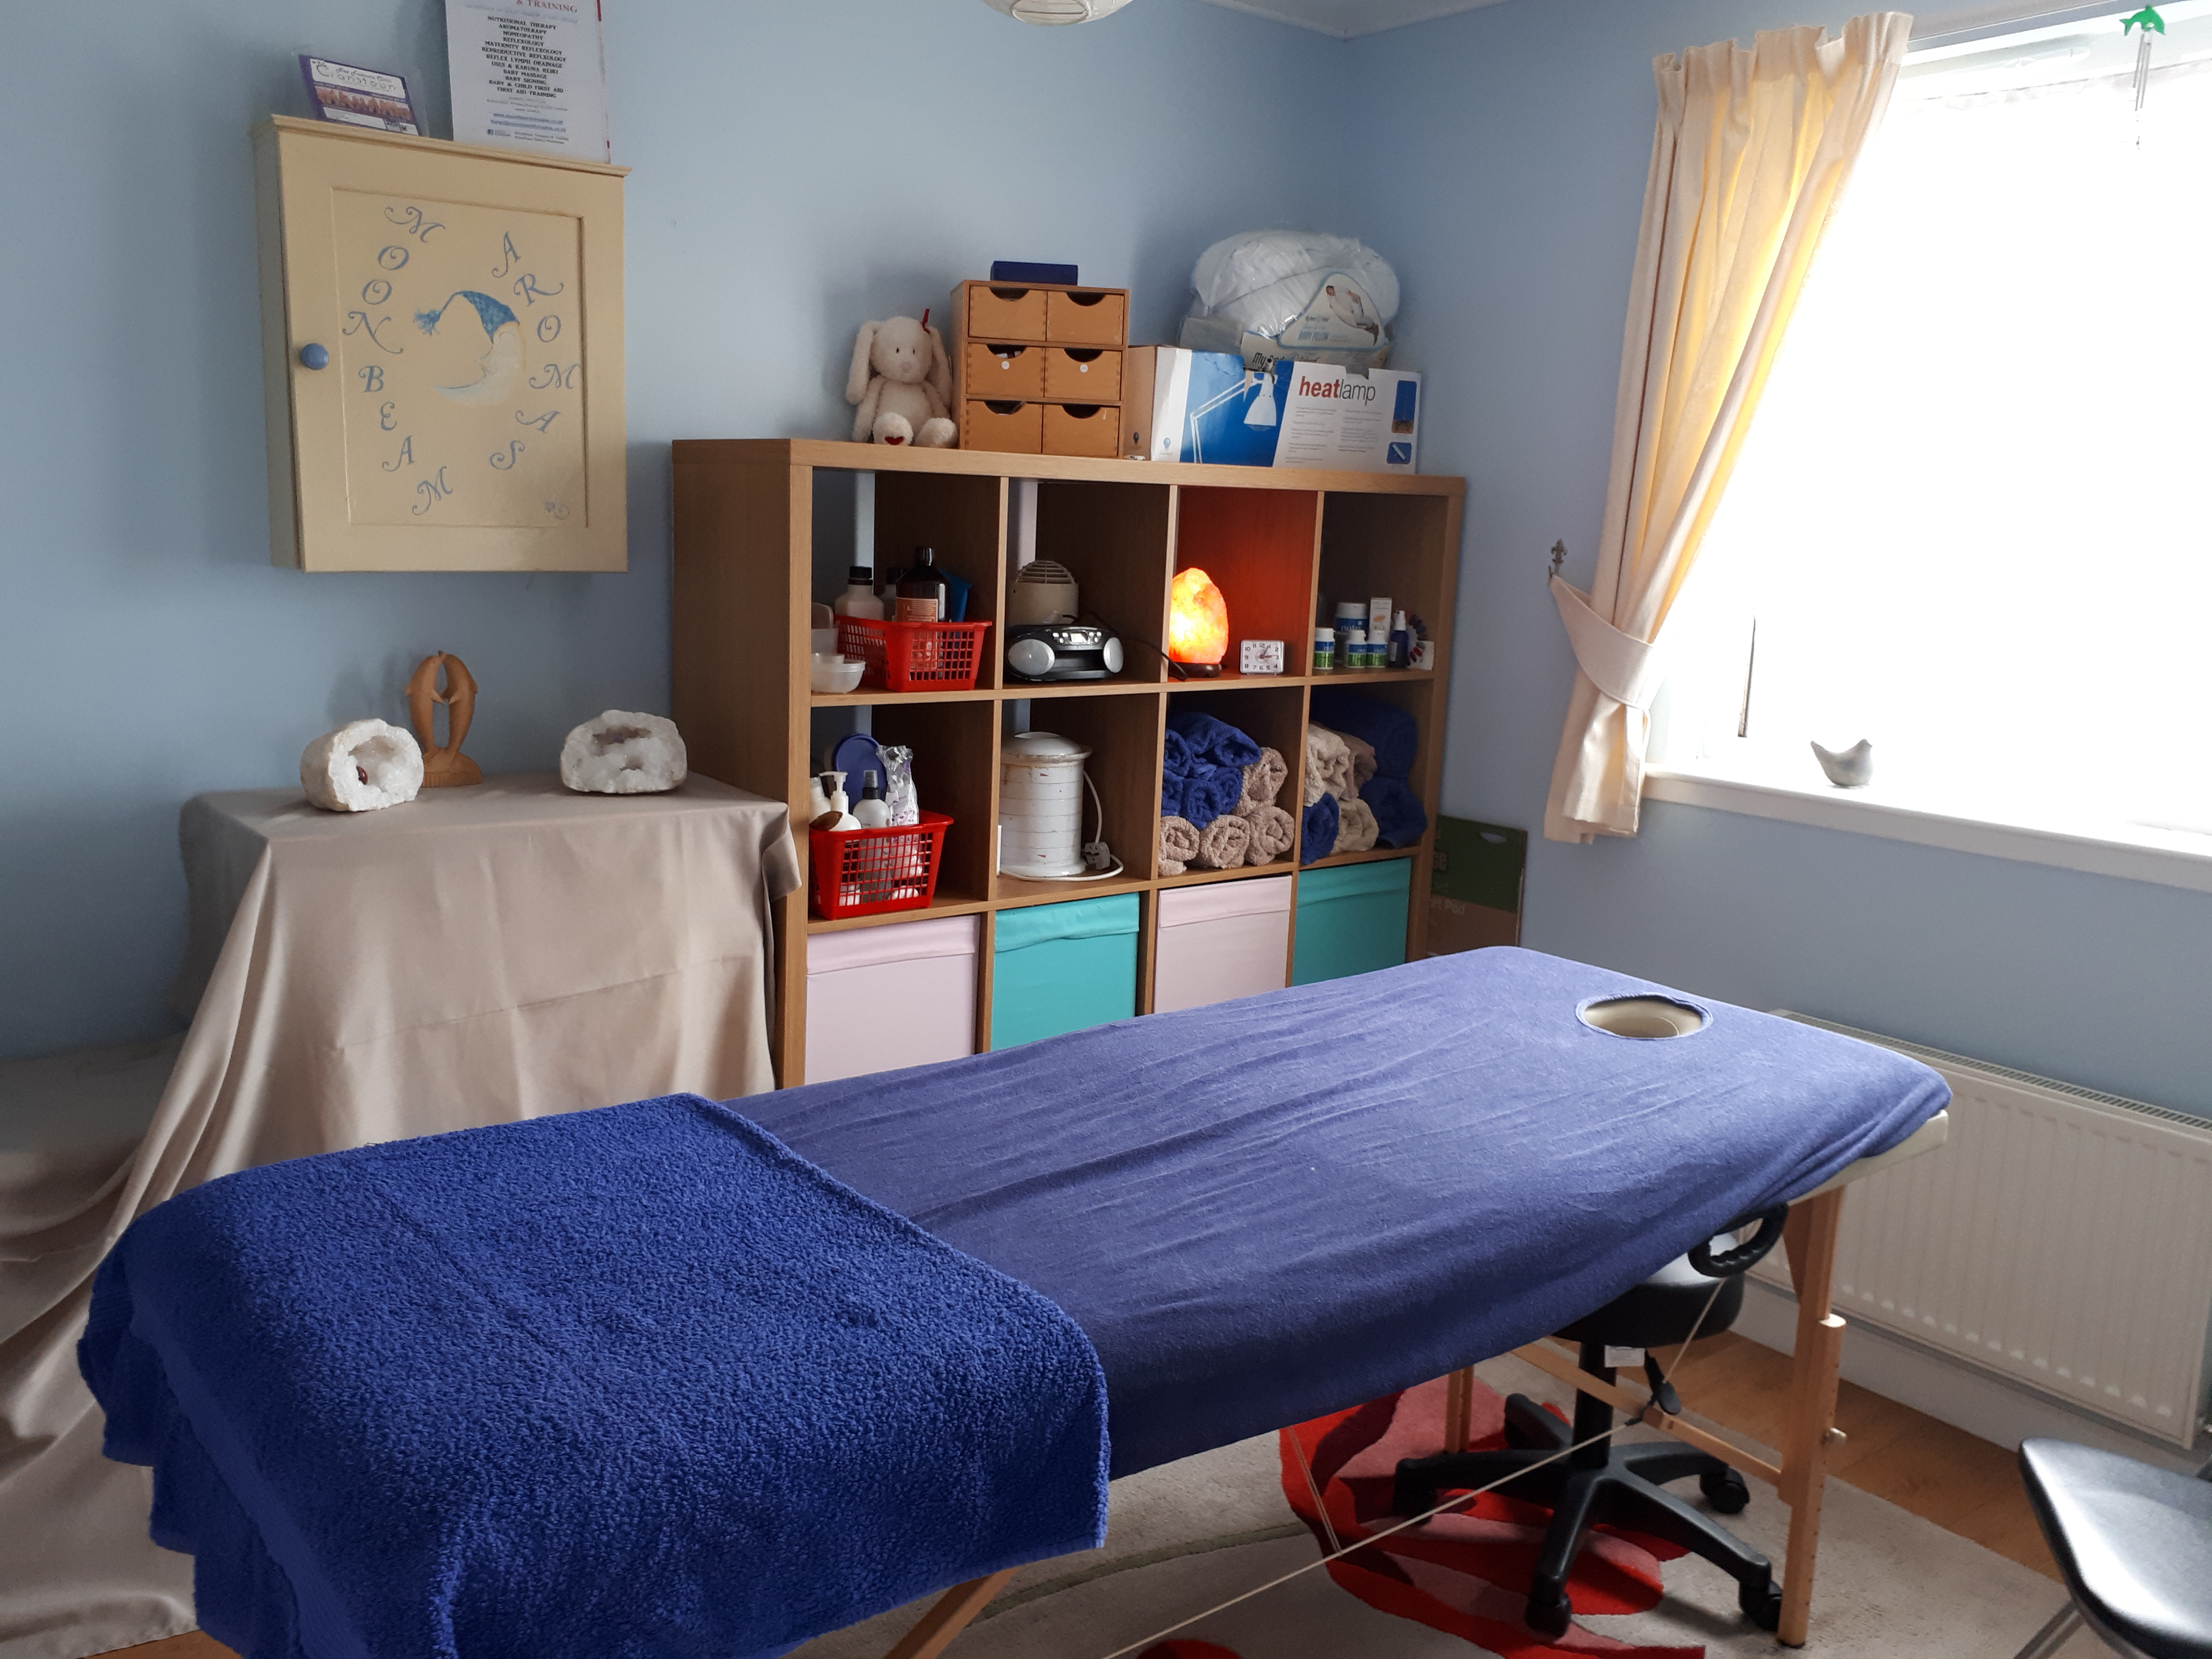 for blog - treatment room set up for a client, massage couch with blue covers on